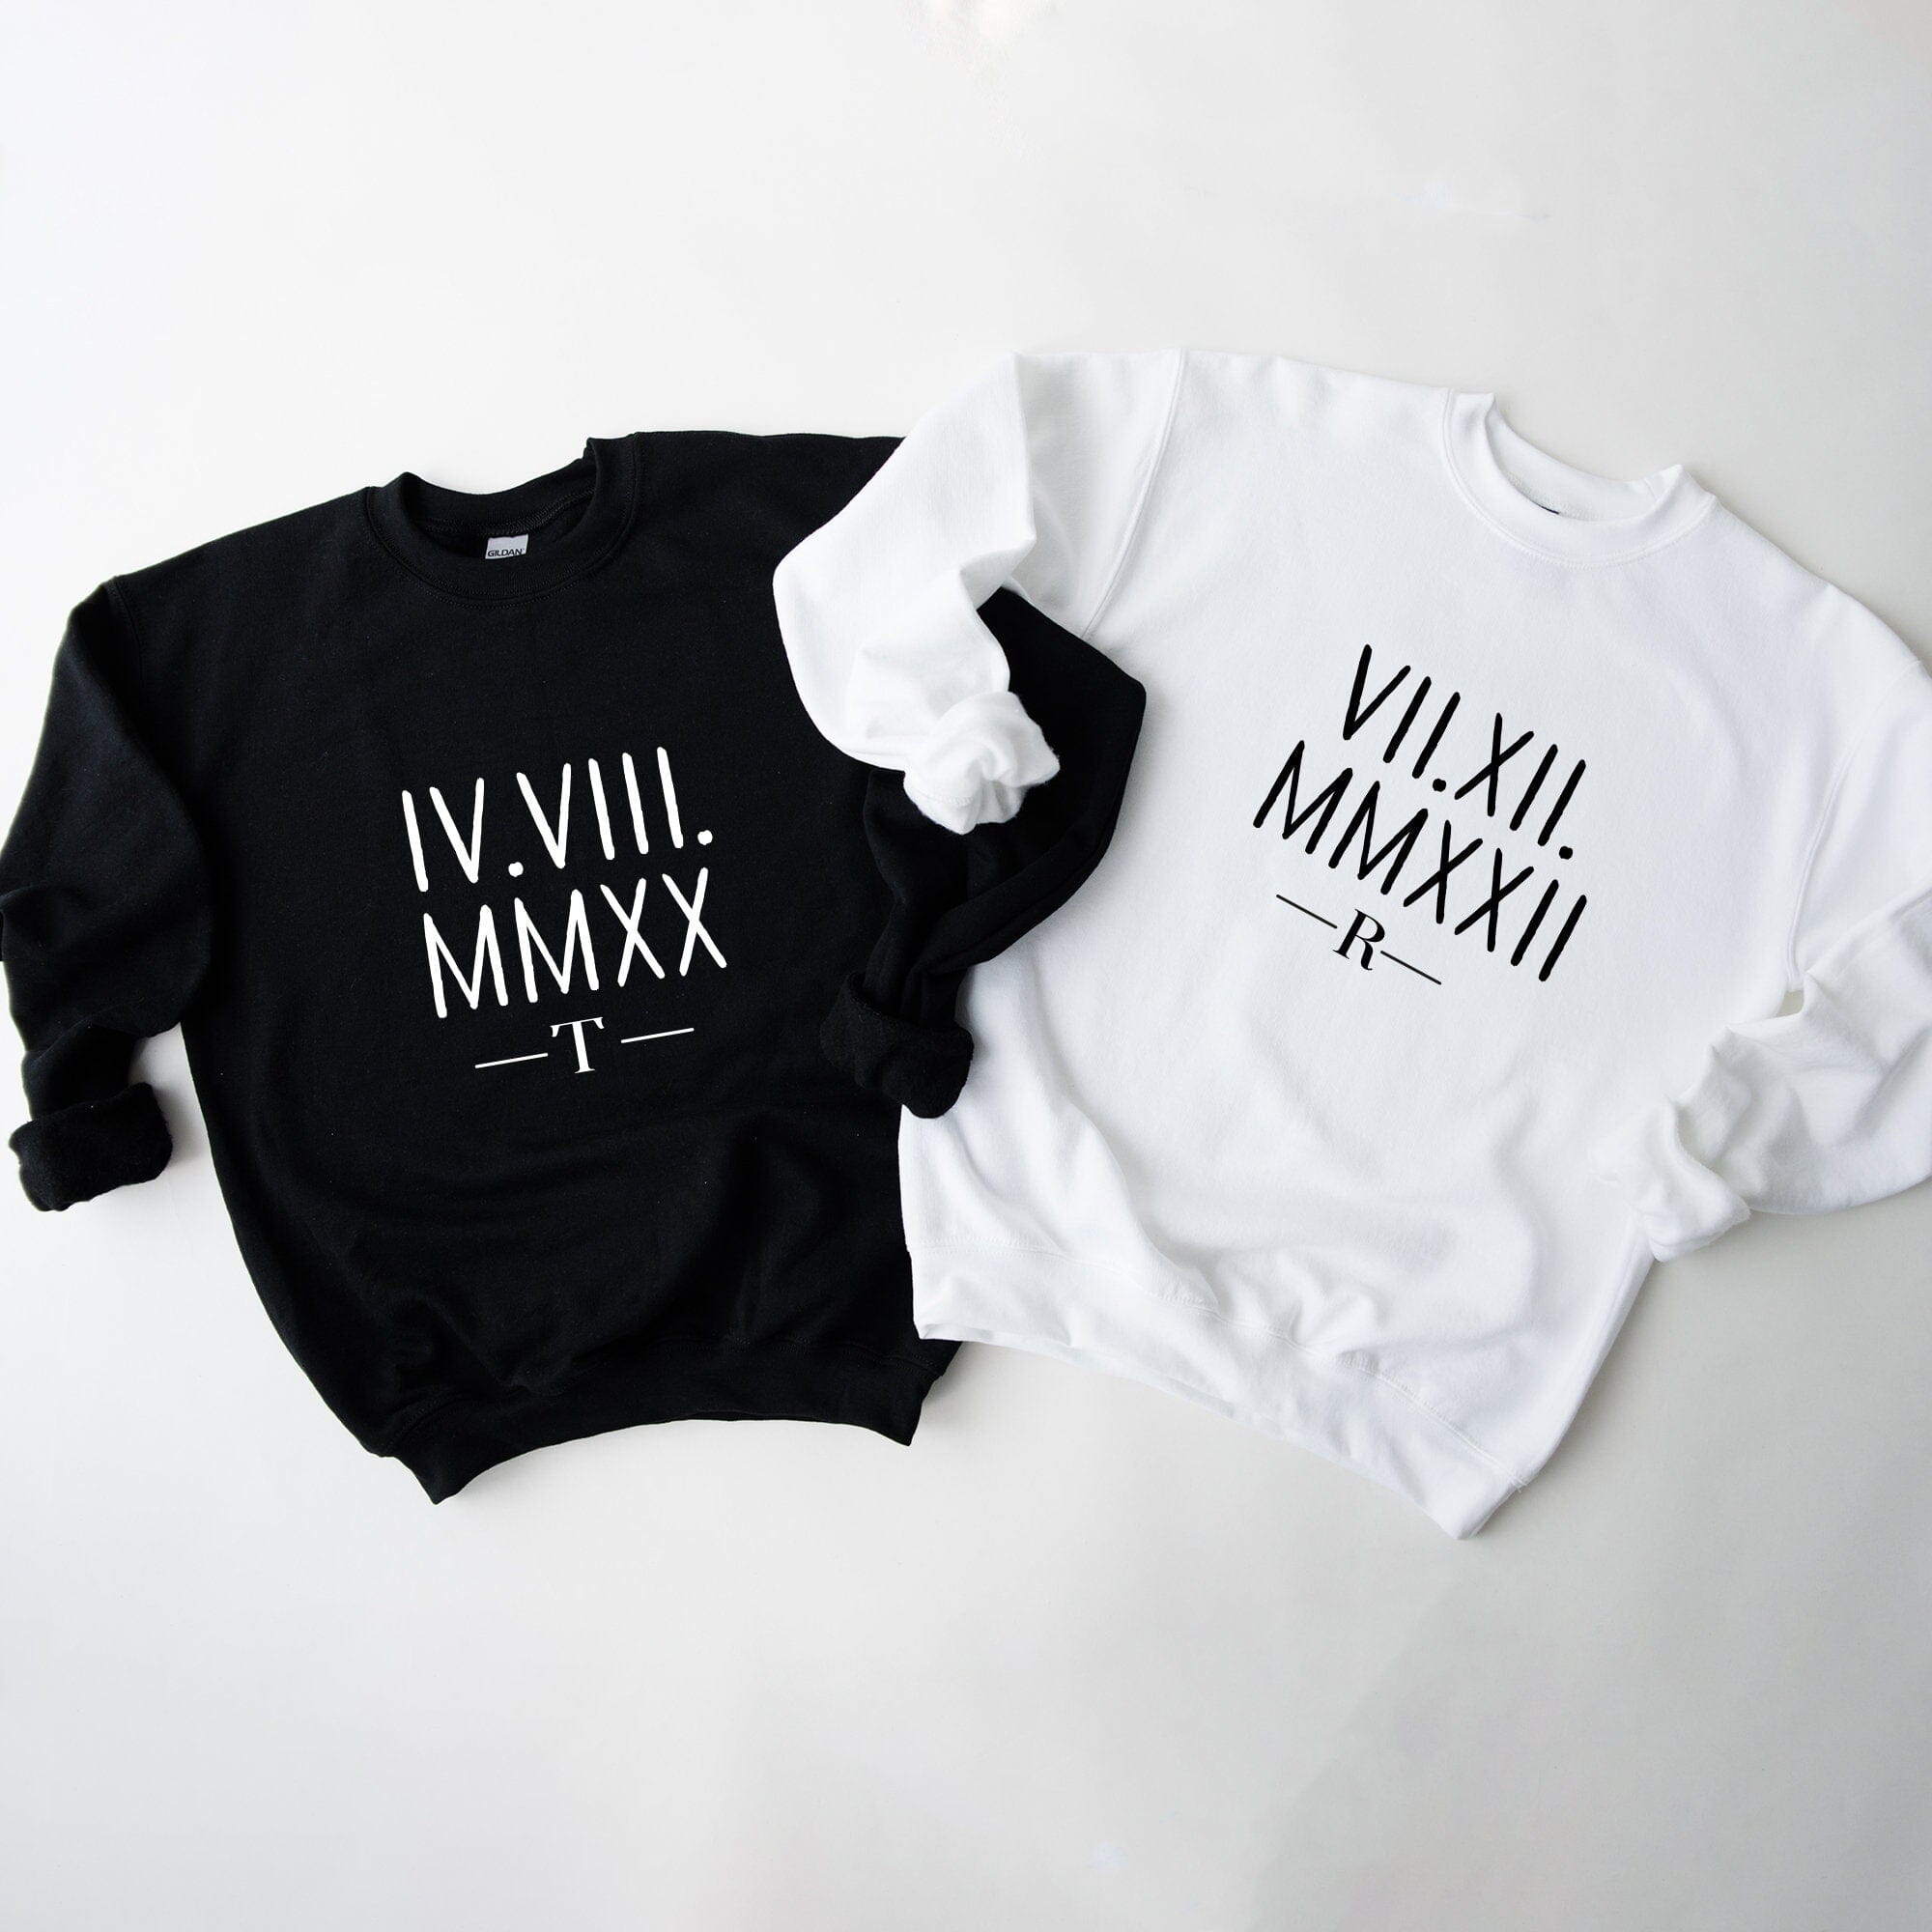 Special Date Roman Numeral Sweatshirt Valentines Gift For Her Him Birthday Gift for Couple